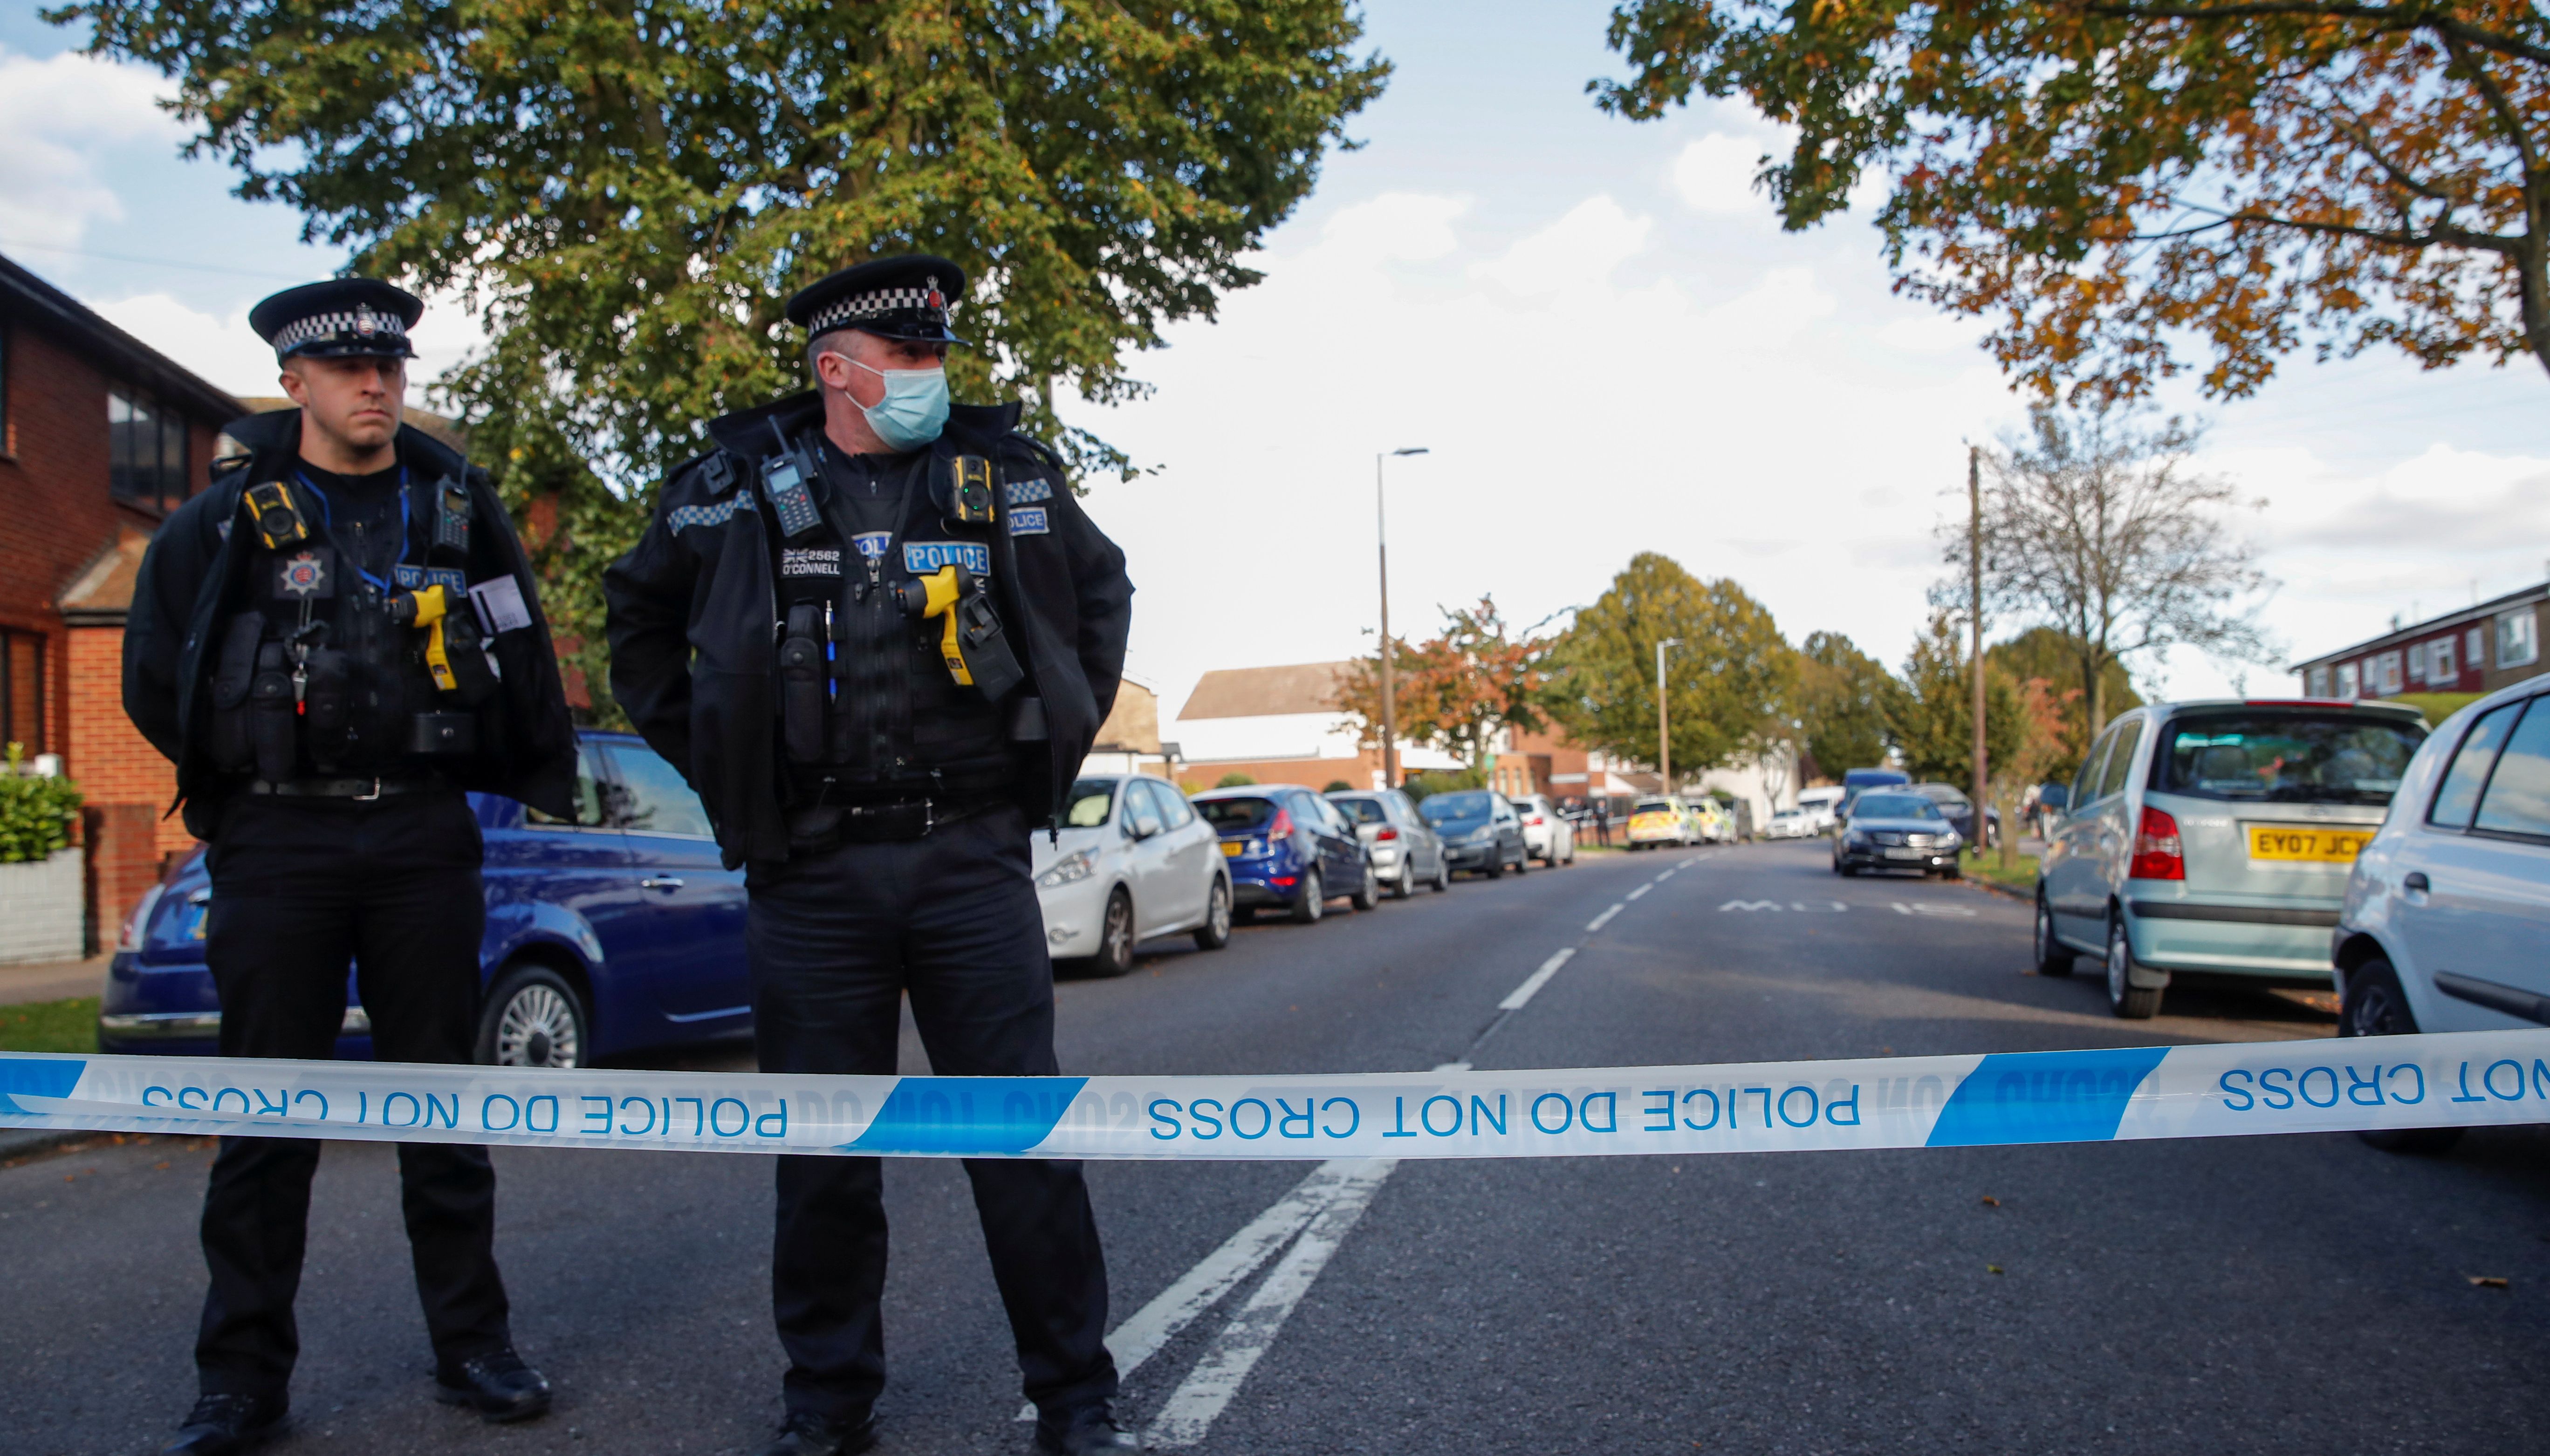 Police officers are seen at the scene where MP David Amess was stabbed during constituency surgery, in Leigh-on-Sea, Essex.